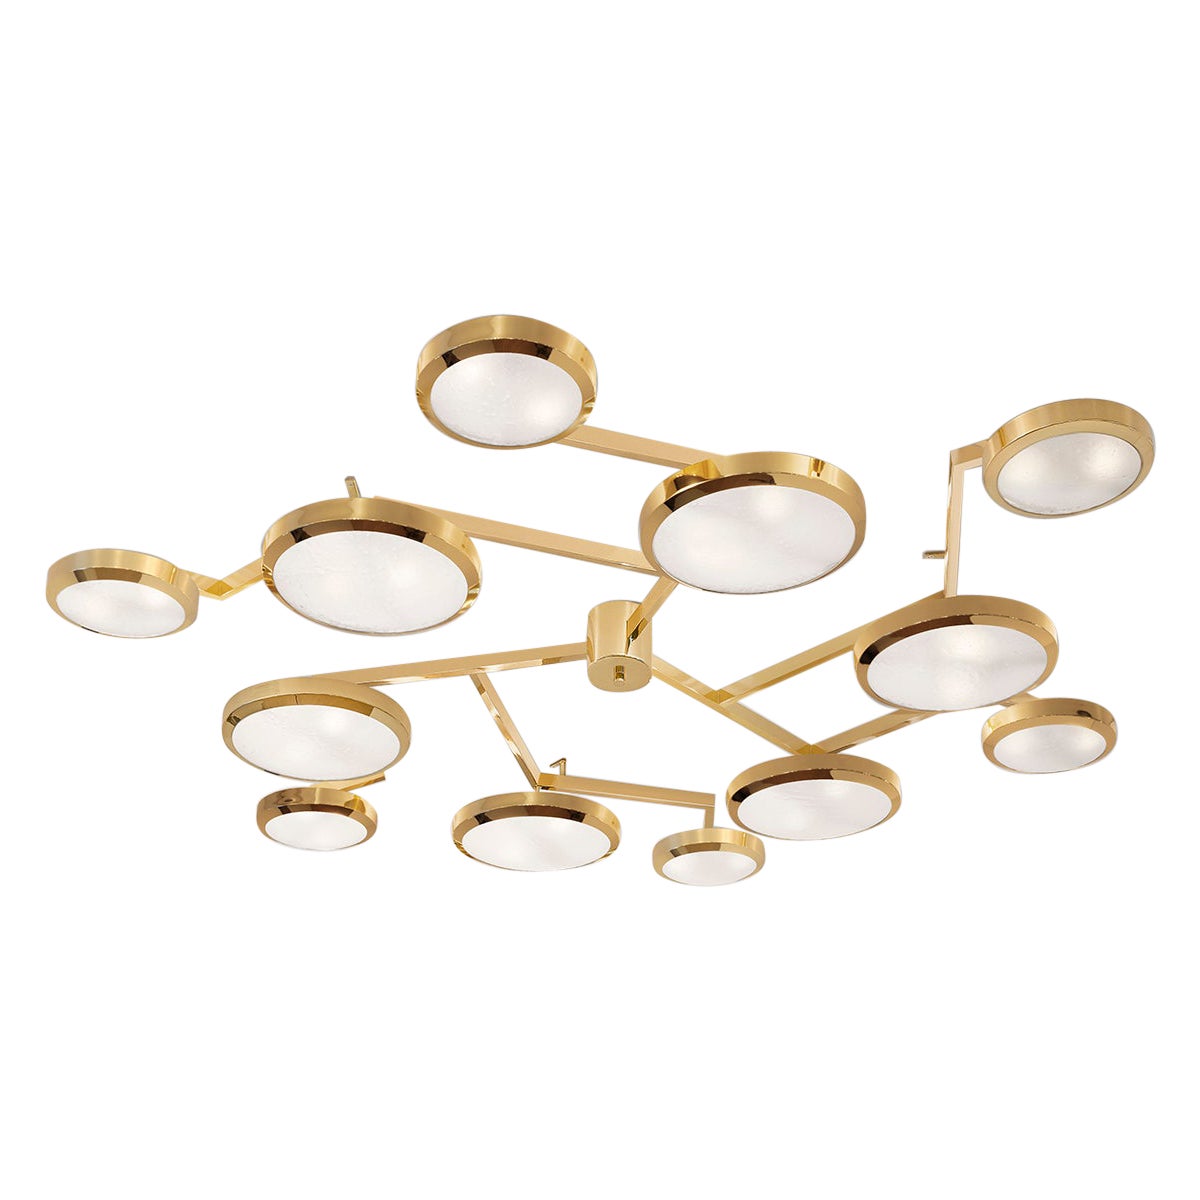 Nuvola Ceiling Light by Gaspare Asaro - Polished Brass Finish For Sale